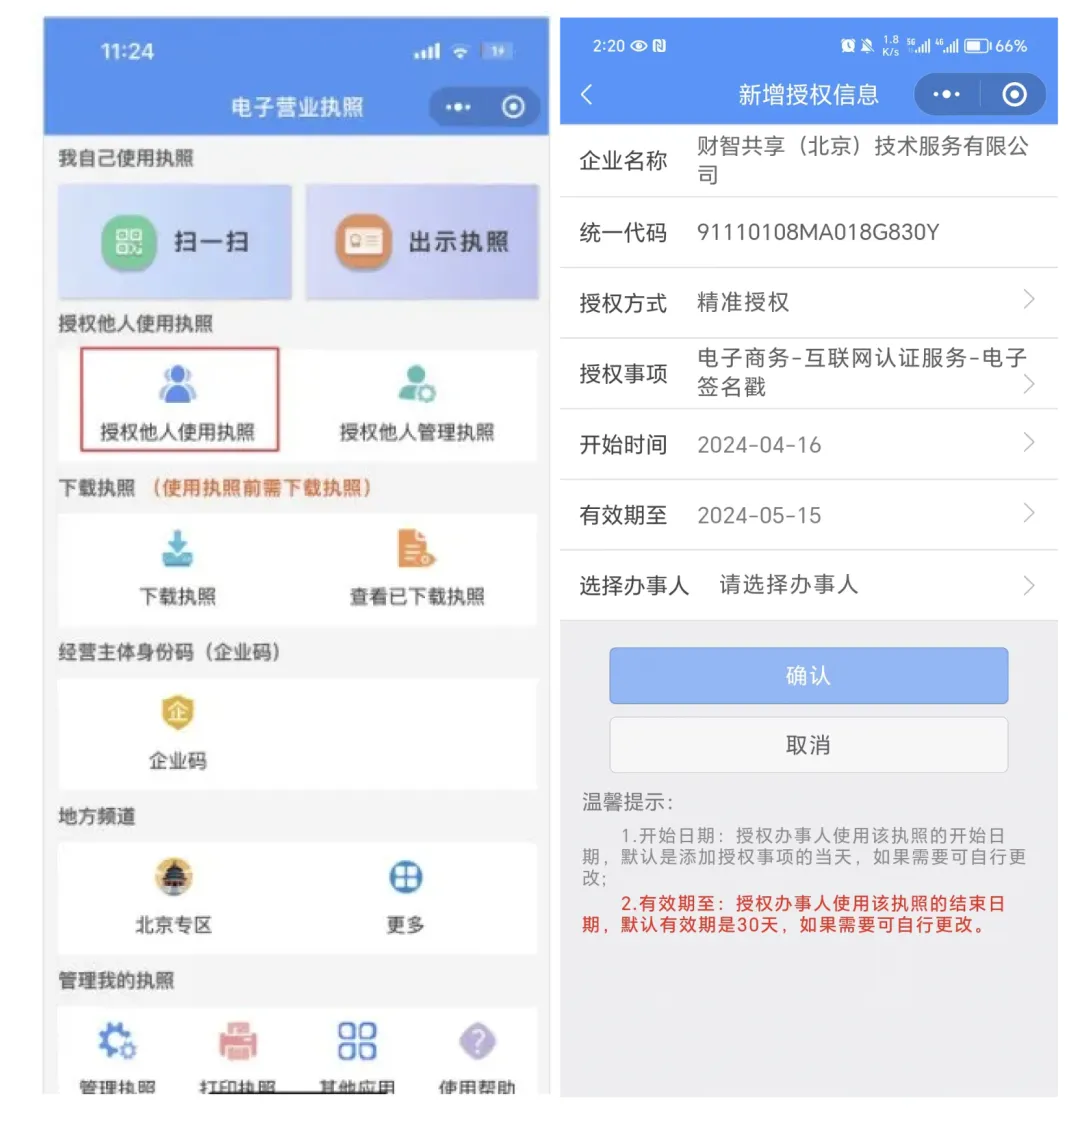 https://client-download-pre.obs.cn-north-4.myhuaweicloud.com/official/pro/940134006912061440.png